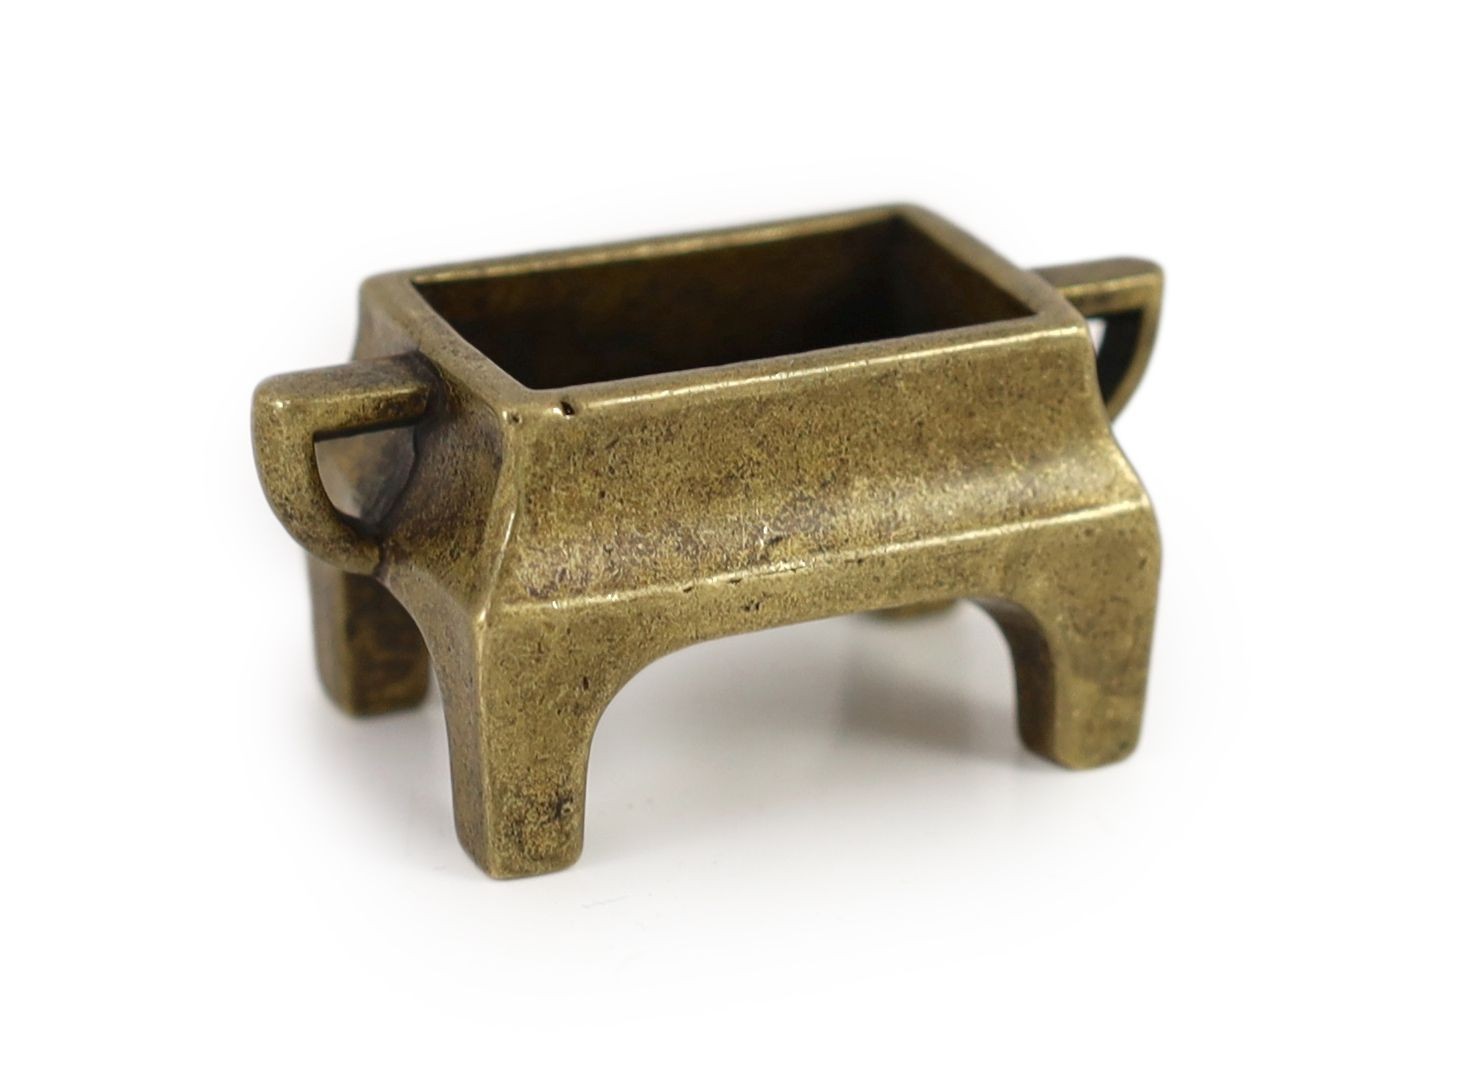 A Chinese miniature bronze censer, fangding, 18th/19th century, 5.6 cm wide